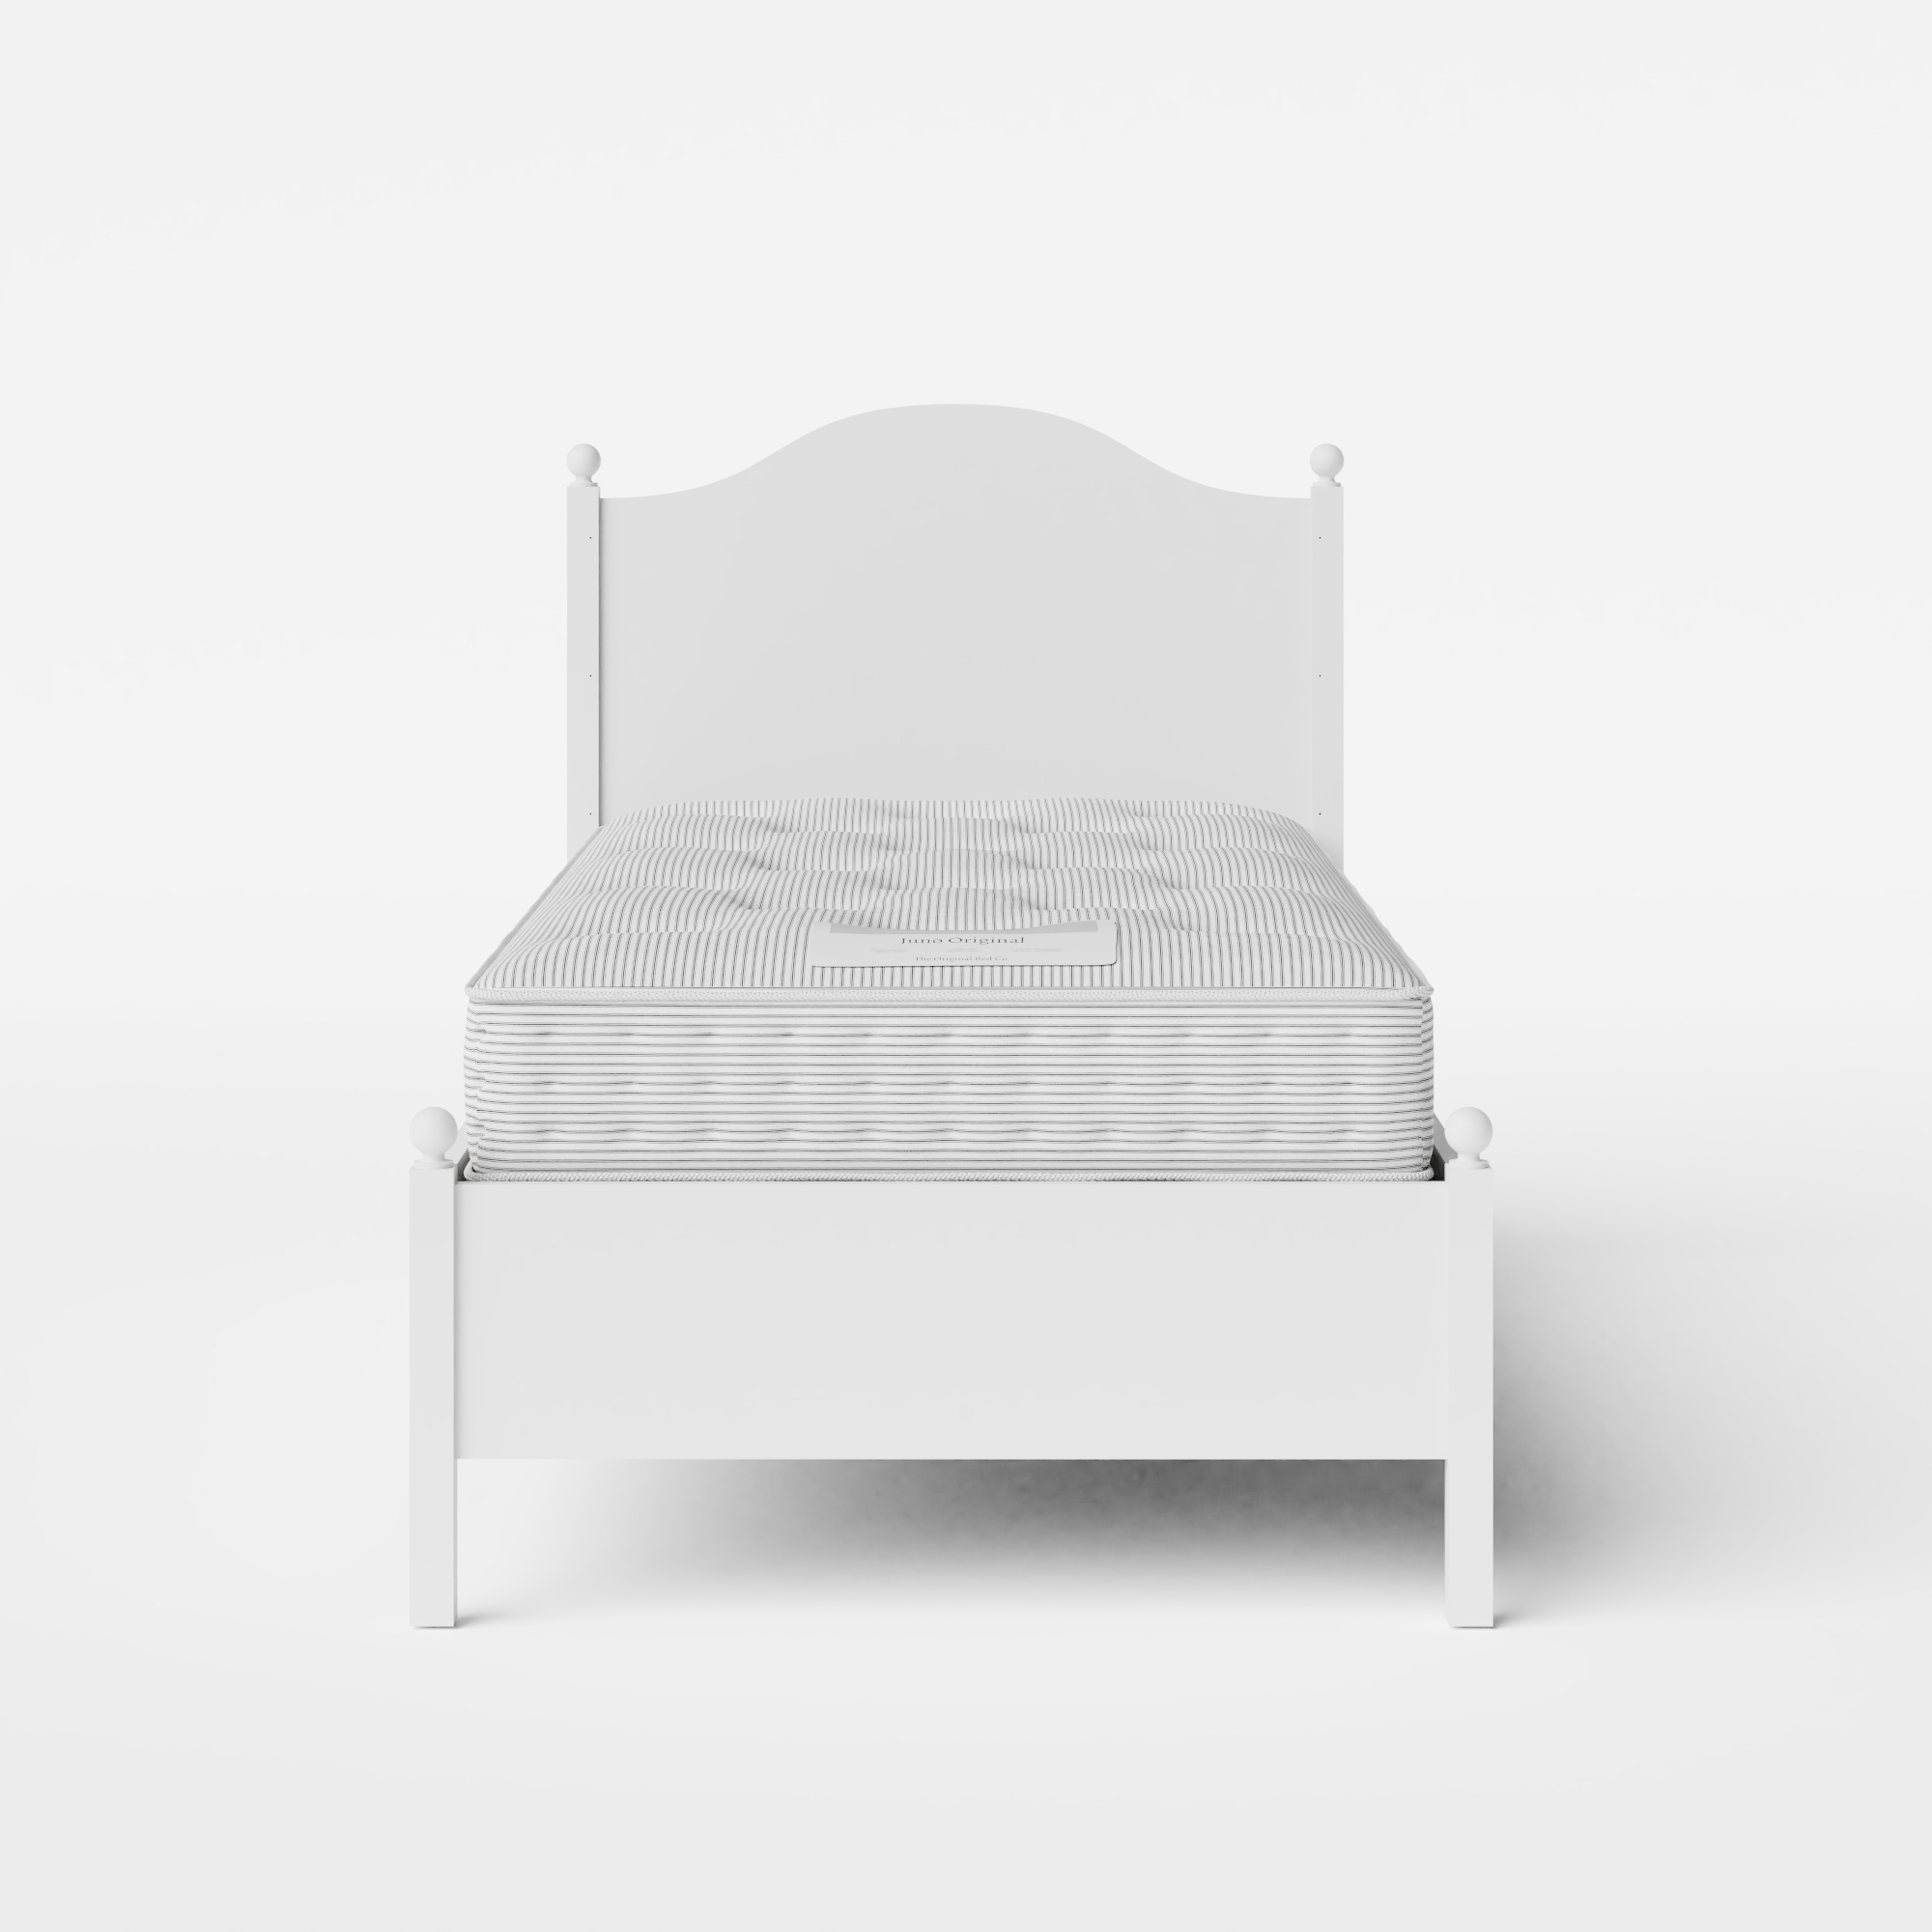 Brady Painted single painted wood bed in white with Juno mattress